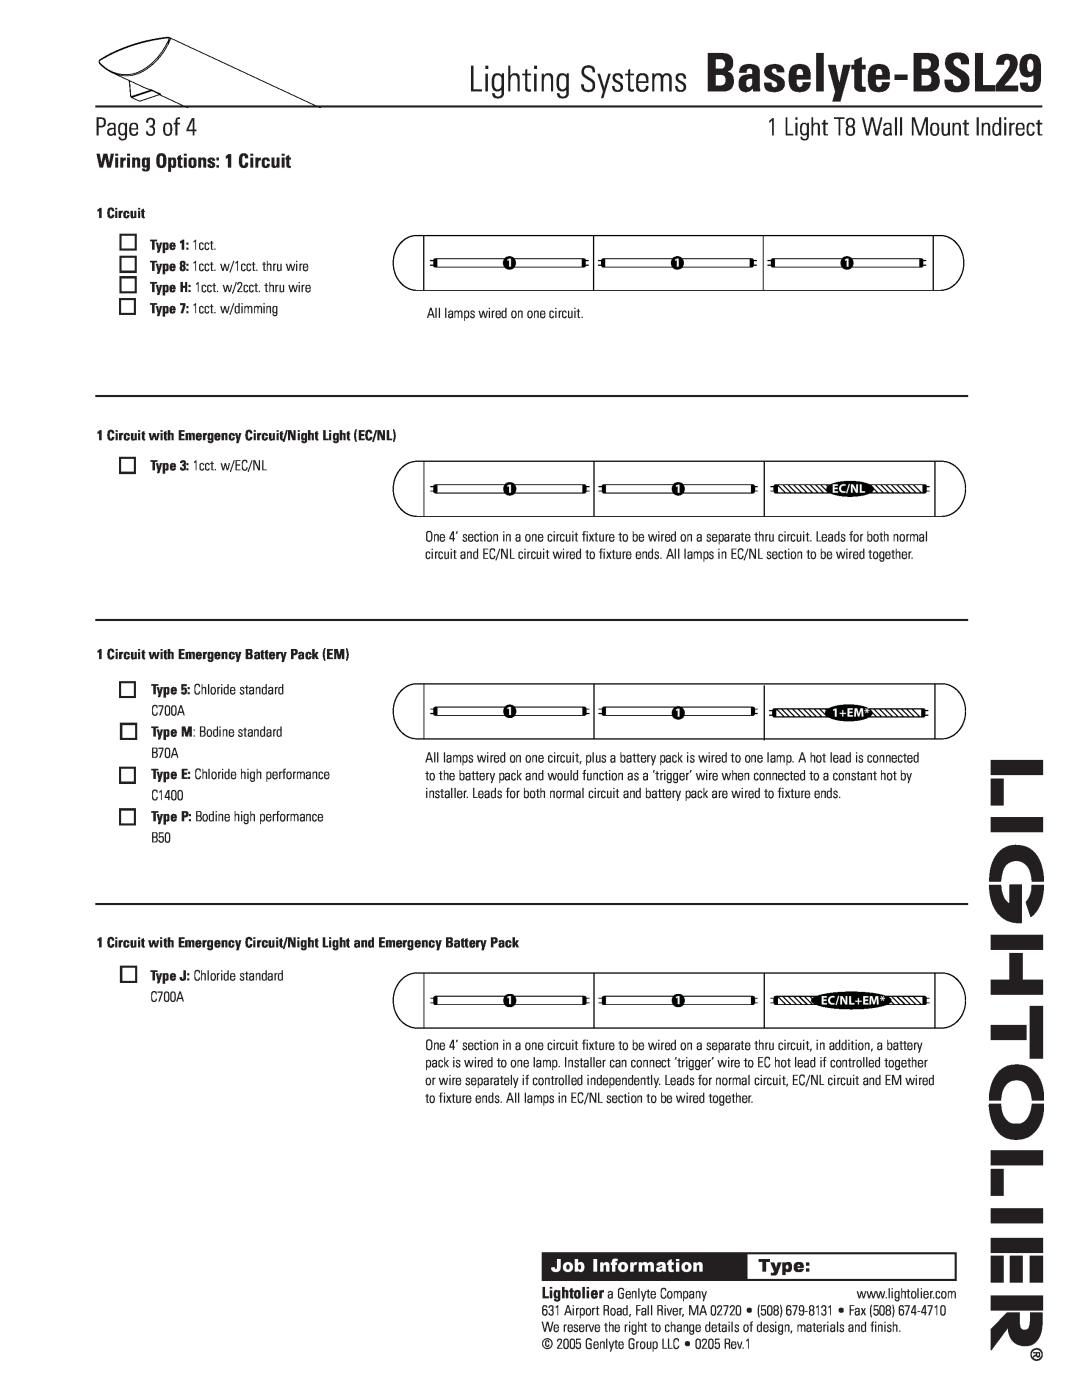 Lightolier Baselyte-BSL29 Wiring Options 1 Circuit, Circuit Type 1 1cct, Circuit with Emergency Battery Pack EM, Page of 